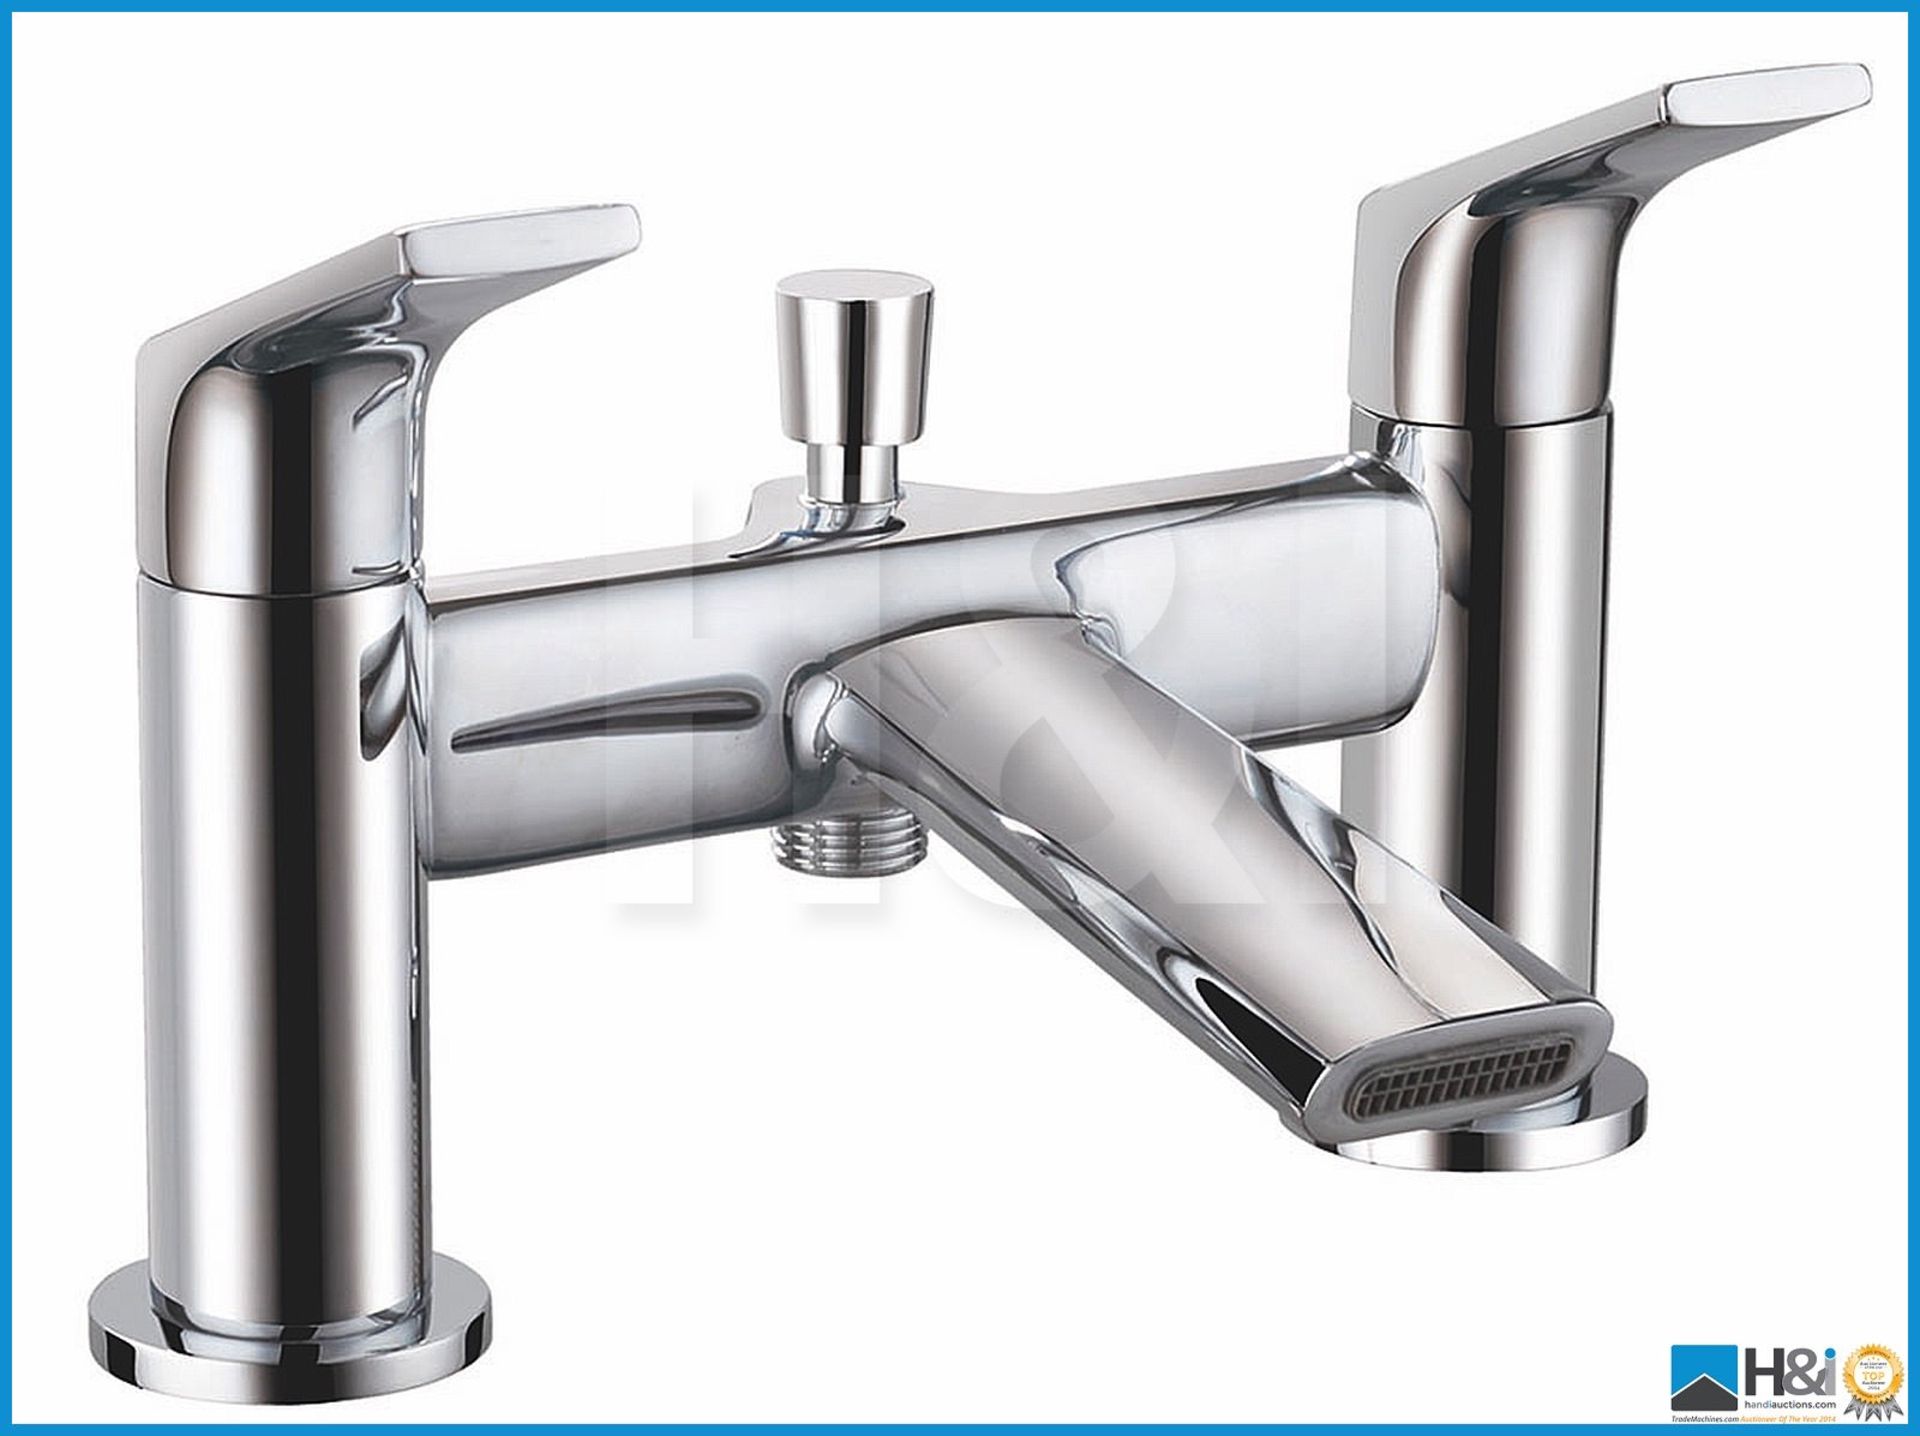 Stunning brand new designer Siena bath shower mixer tap in polished chrome finish. Suggested manufac